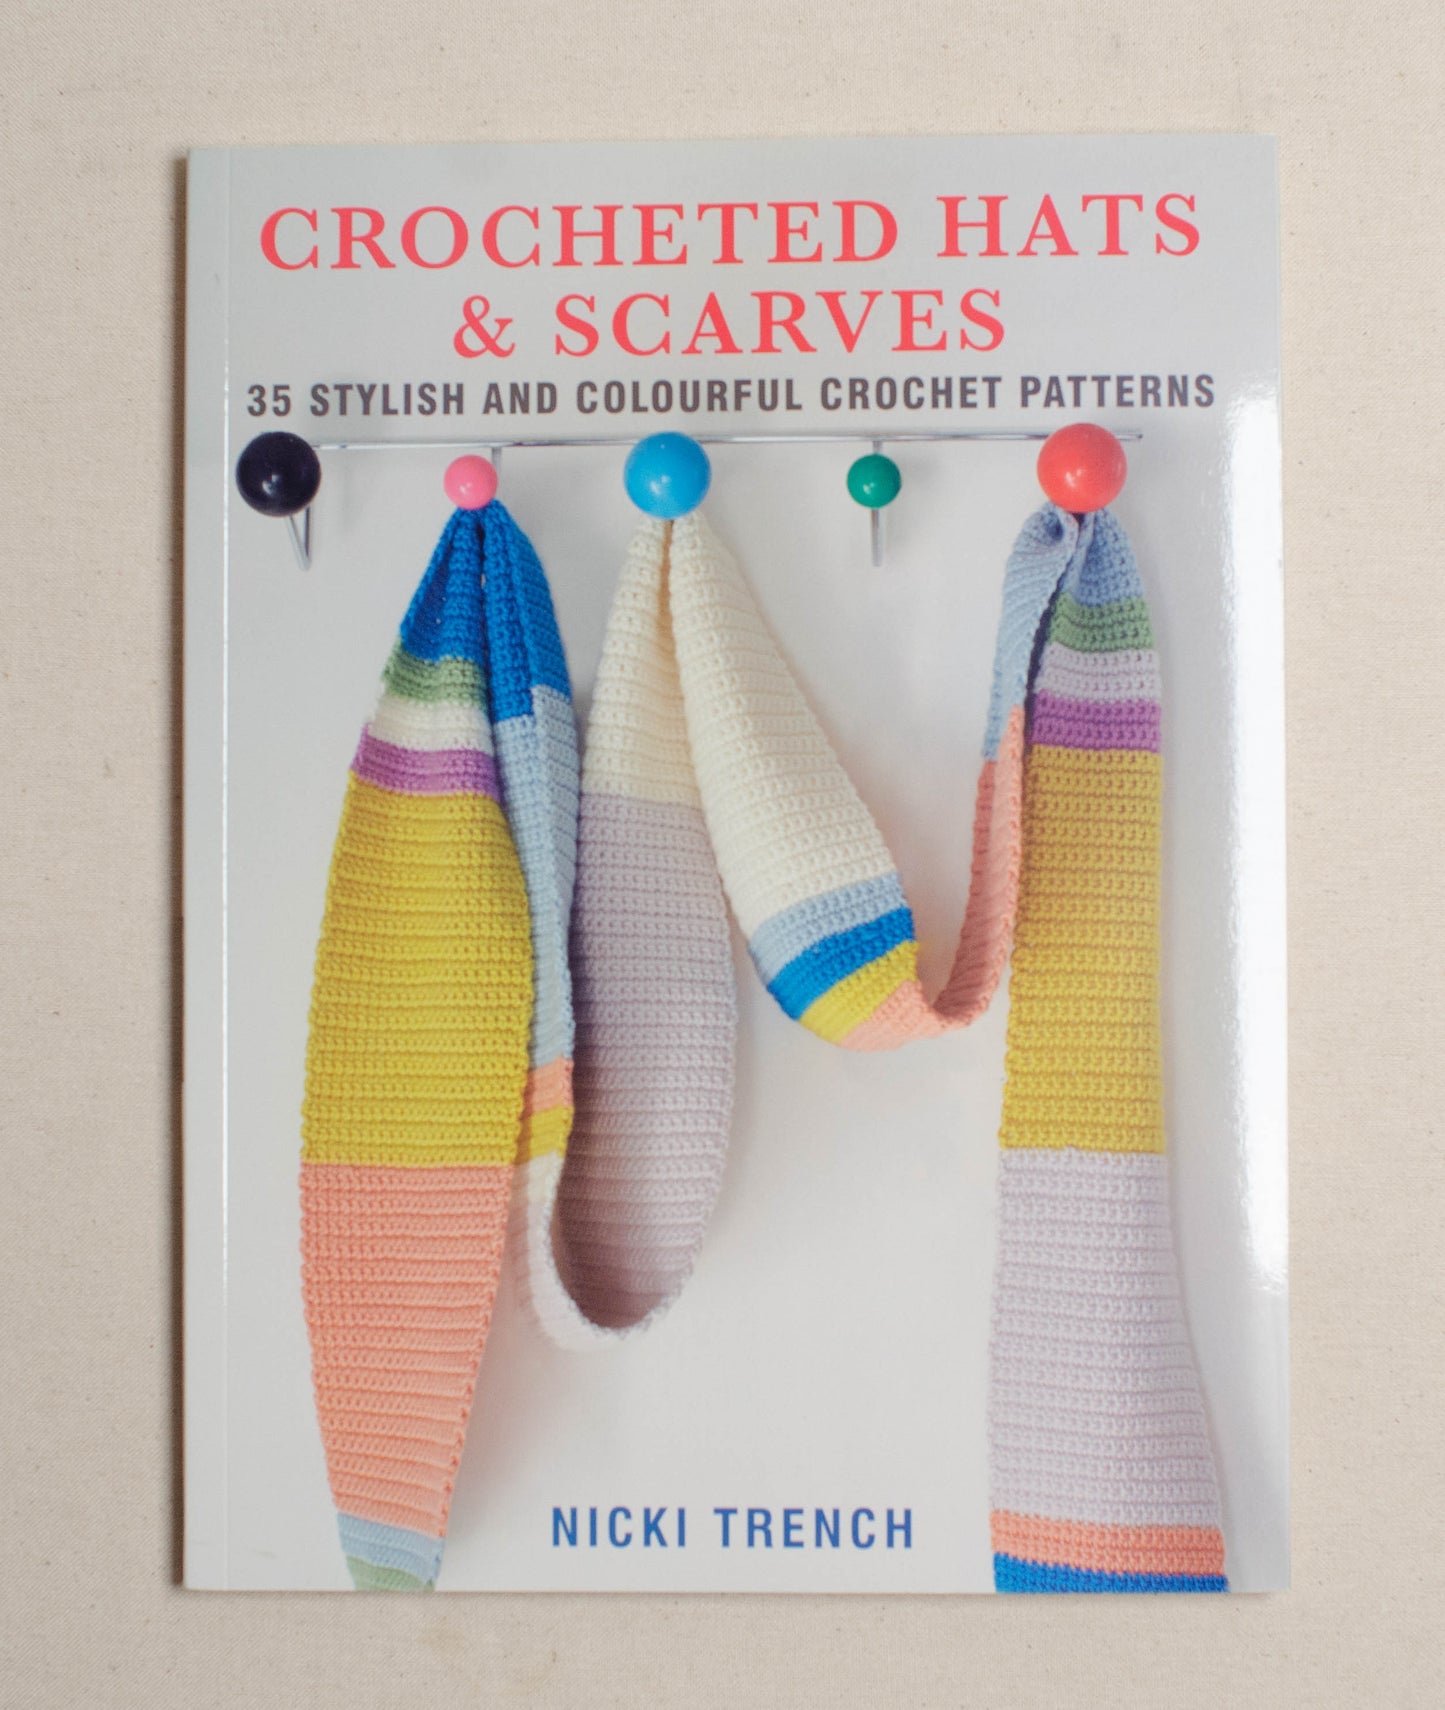 Crocheted Hats and Scarves: 35 stylish and colorful crochet patterns